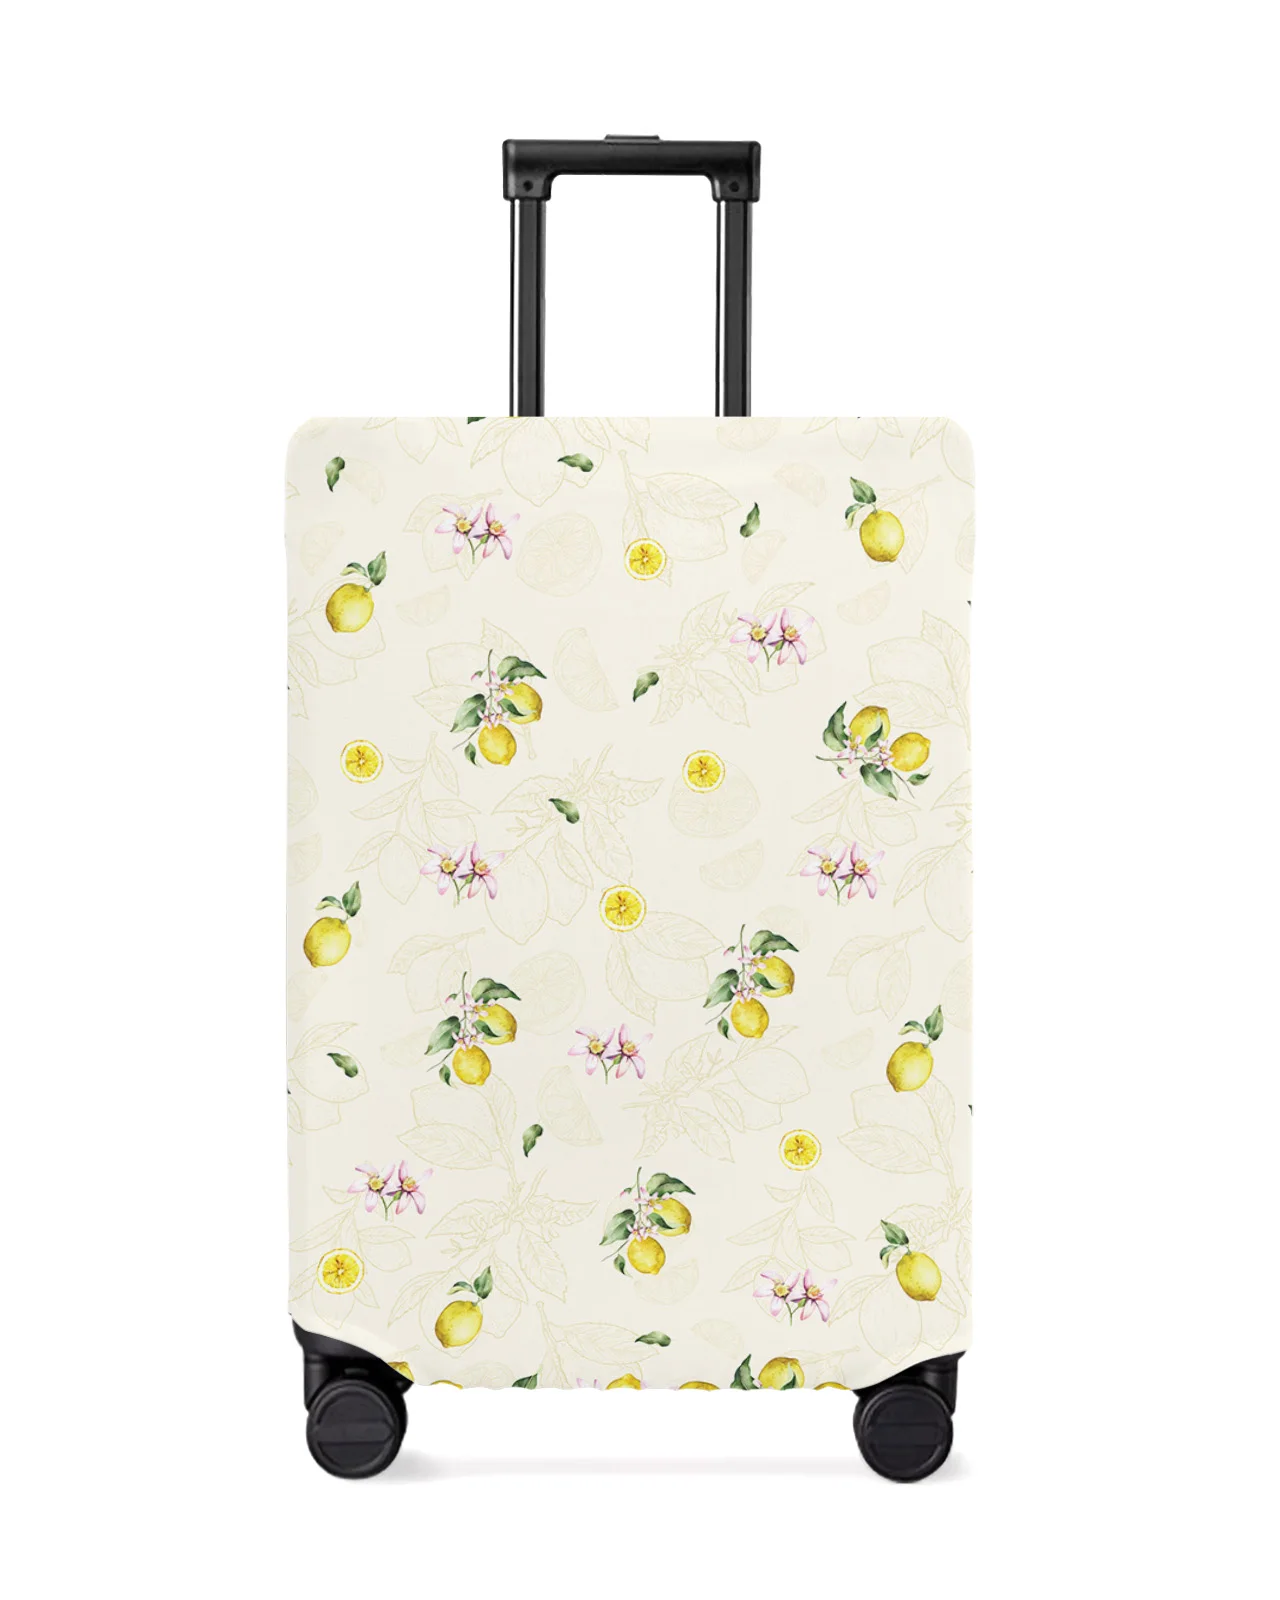 

Idyllic Summer Fruit Lemon Luggage Cover Stretch Suitcase Protector Baggage Dust Case Cover for 18-32 Inch Travel Suitcase Case